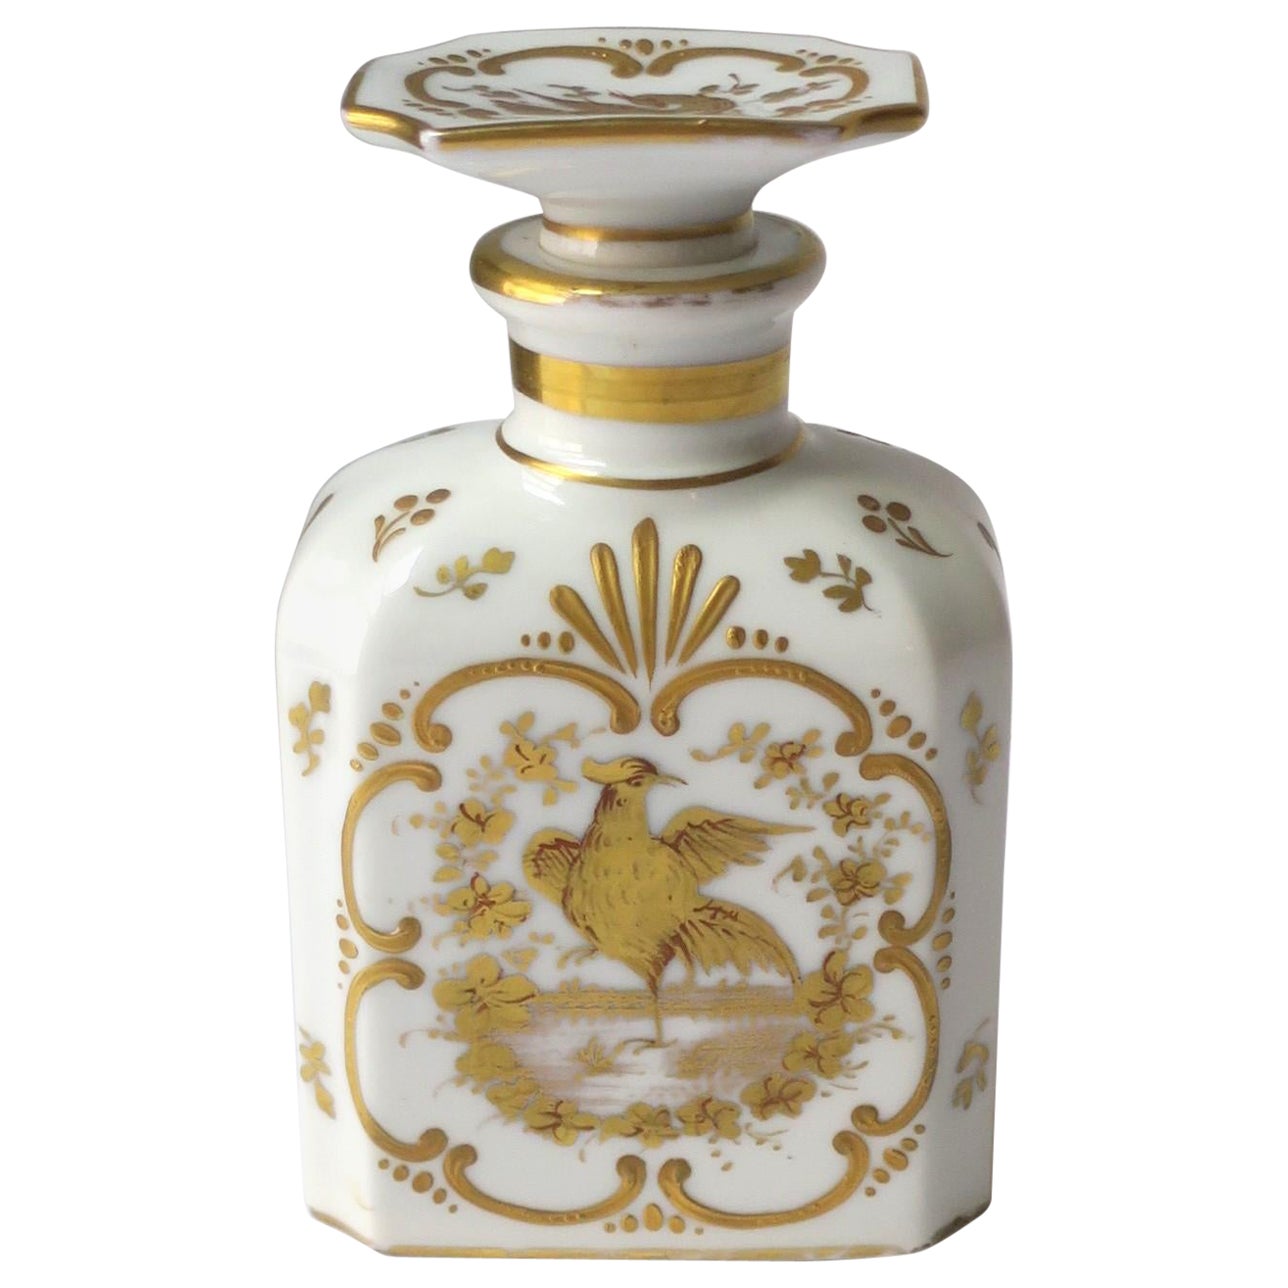 Italian White and Gold Porcelain Vanity Bottle with Bird Design Rococo Style